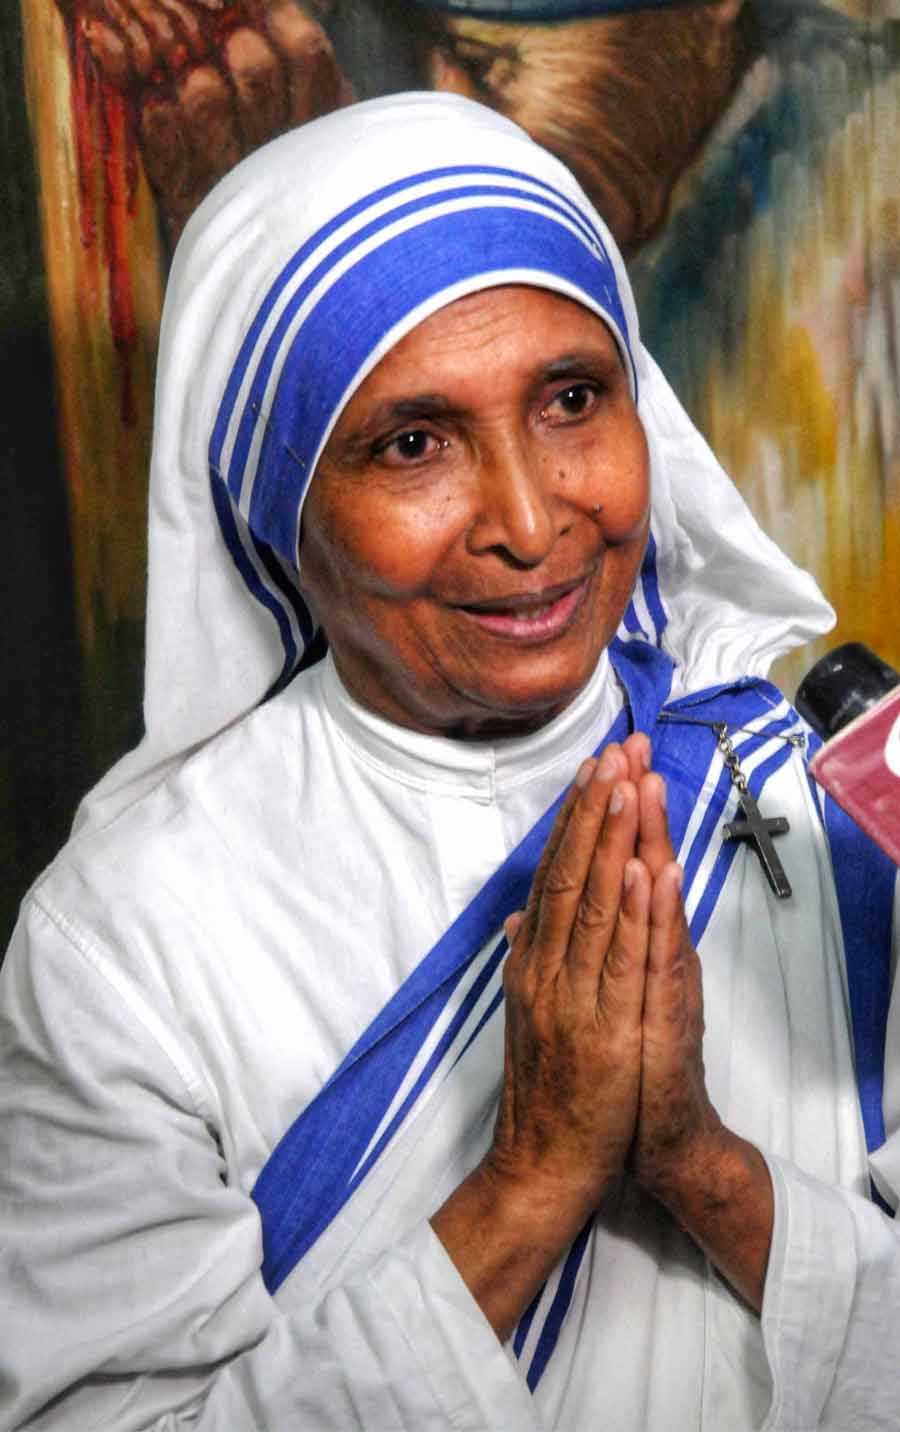 Sister Joseph, the new Superior General of Missionaries of Charity, speaks to the press at Mother House in central Kolkata on Wednesday. Sister Joseph, who was elected last Saturday, replaced Sister Prema, who helmed the organisation founded by Mother Teresa for 13 years